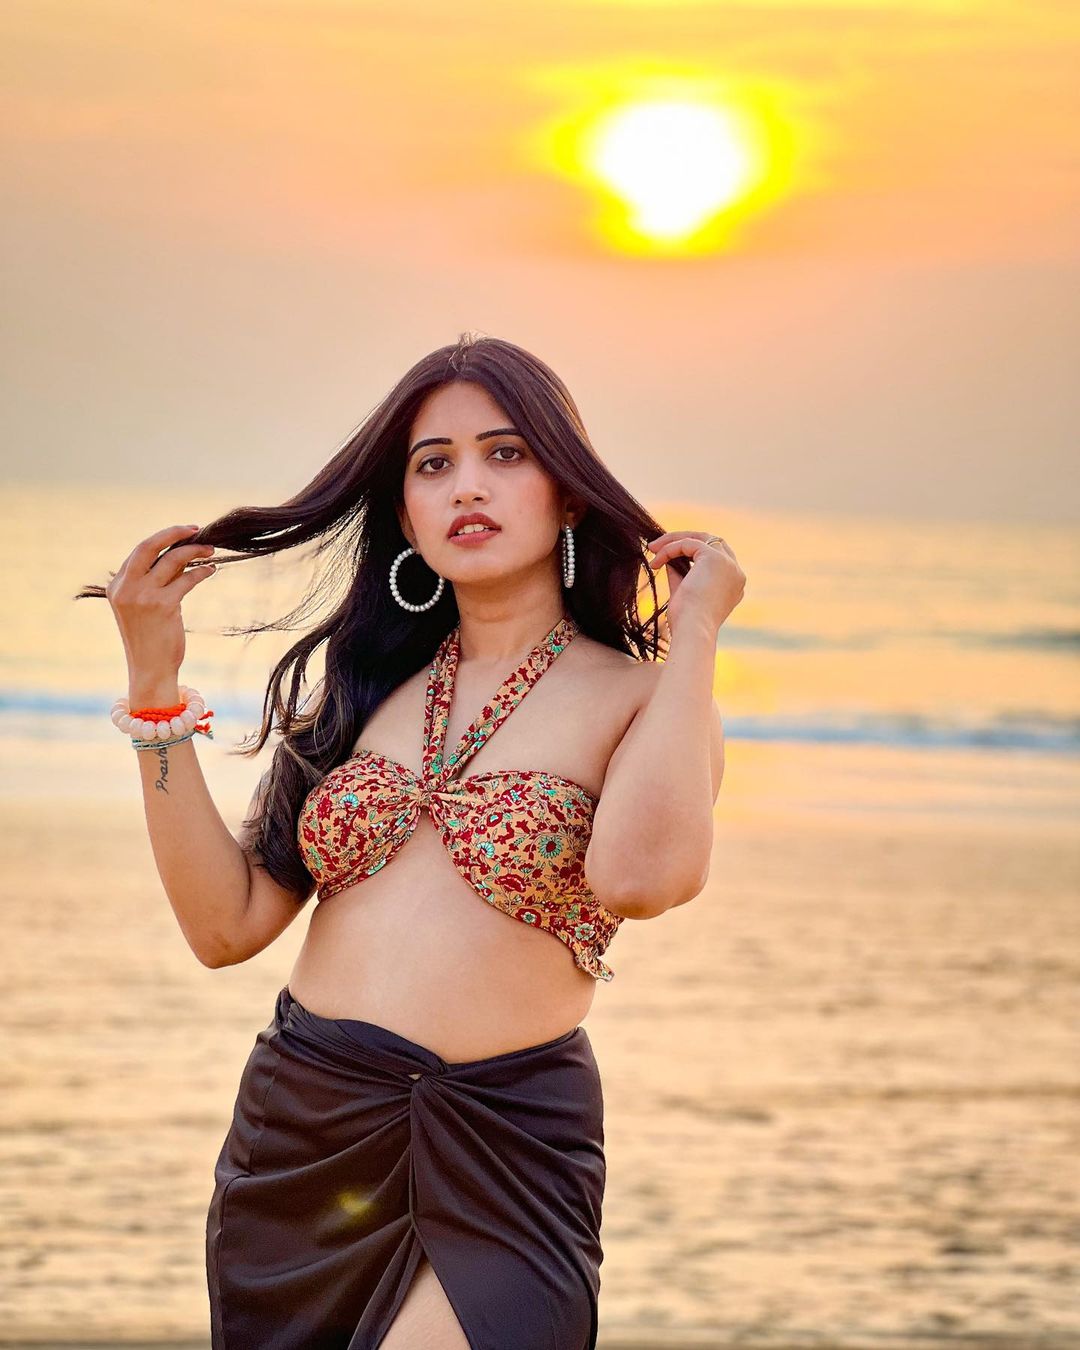 Sravanthi chokarapu is too hot and graceful in this poses-Anchorsravanthi Photos,Spicy Hot Pics,Images,High Resolution WallPapers Download